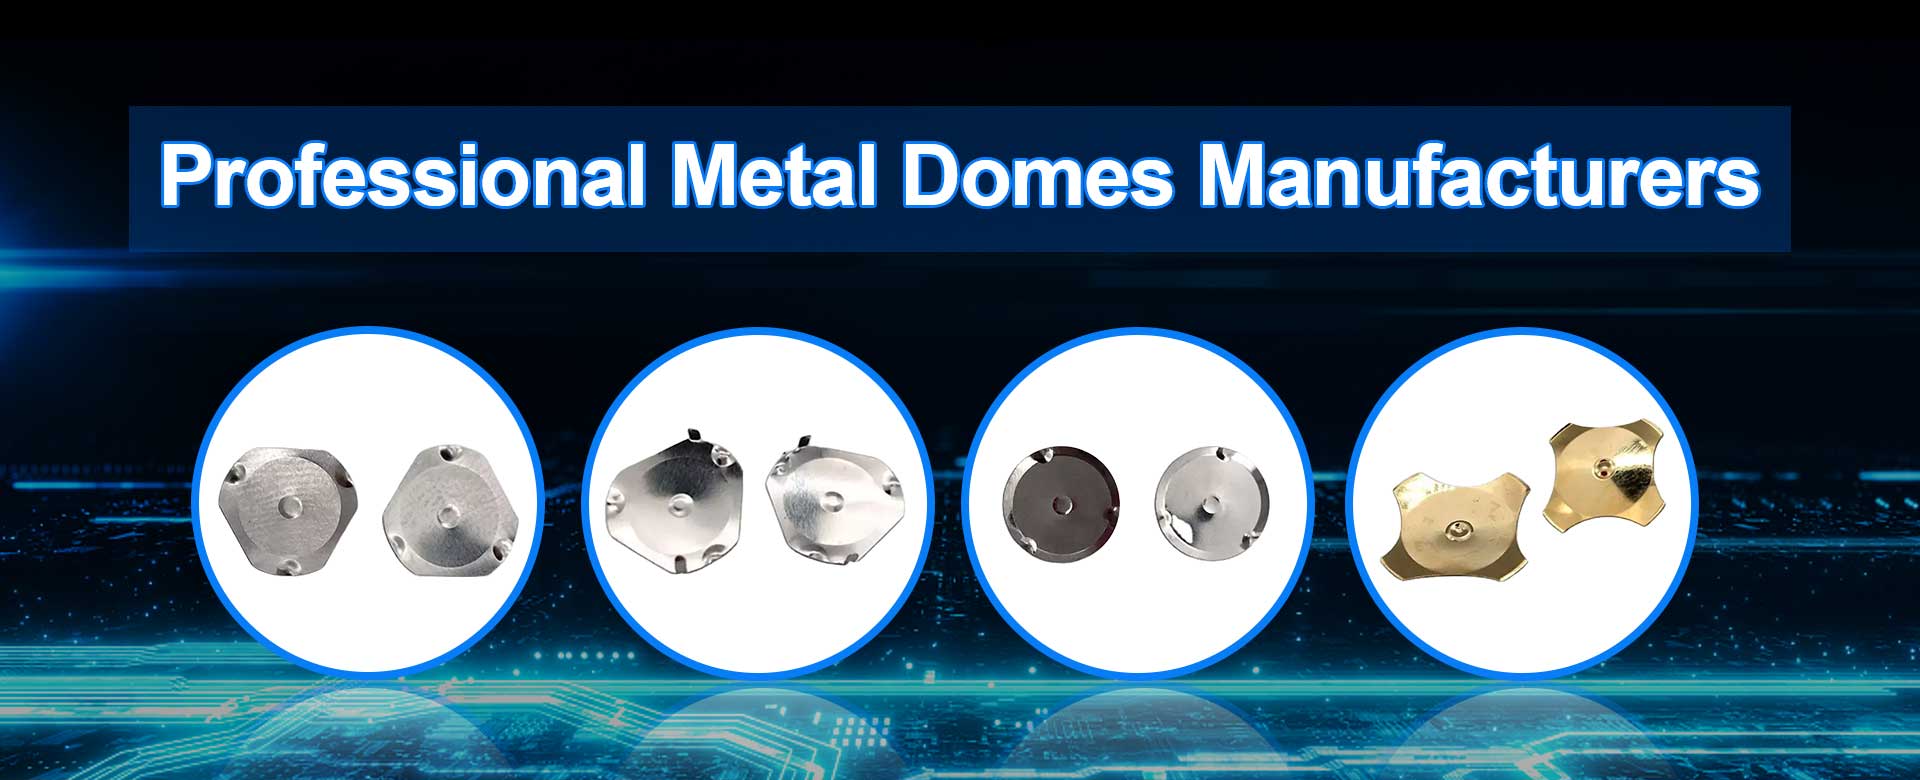 Metal domes array Manufacturers